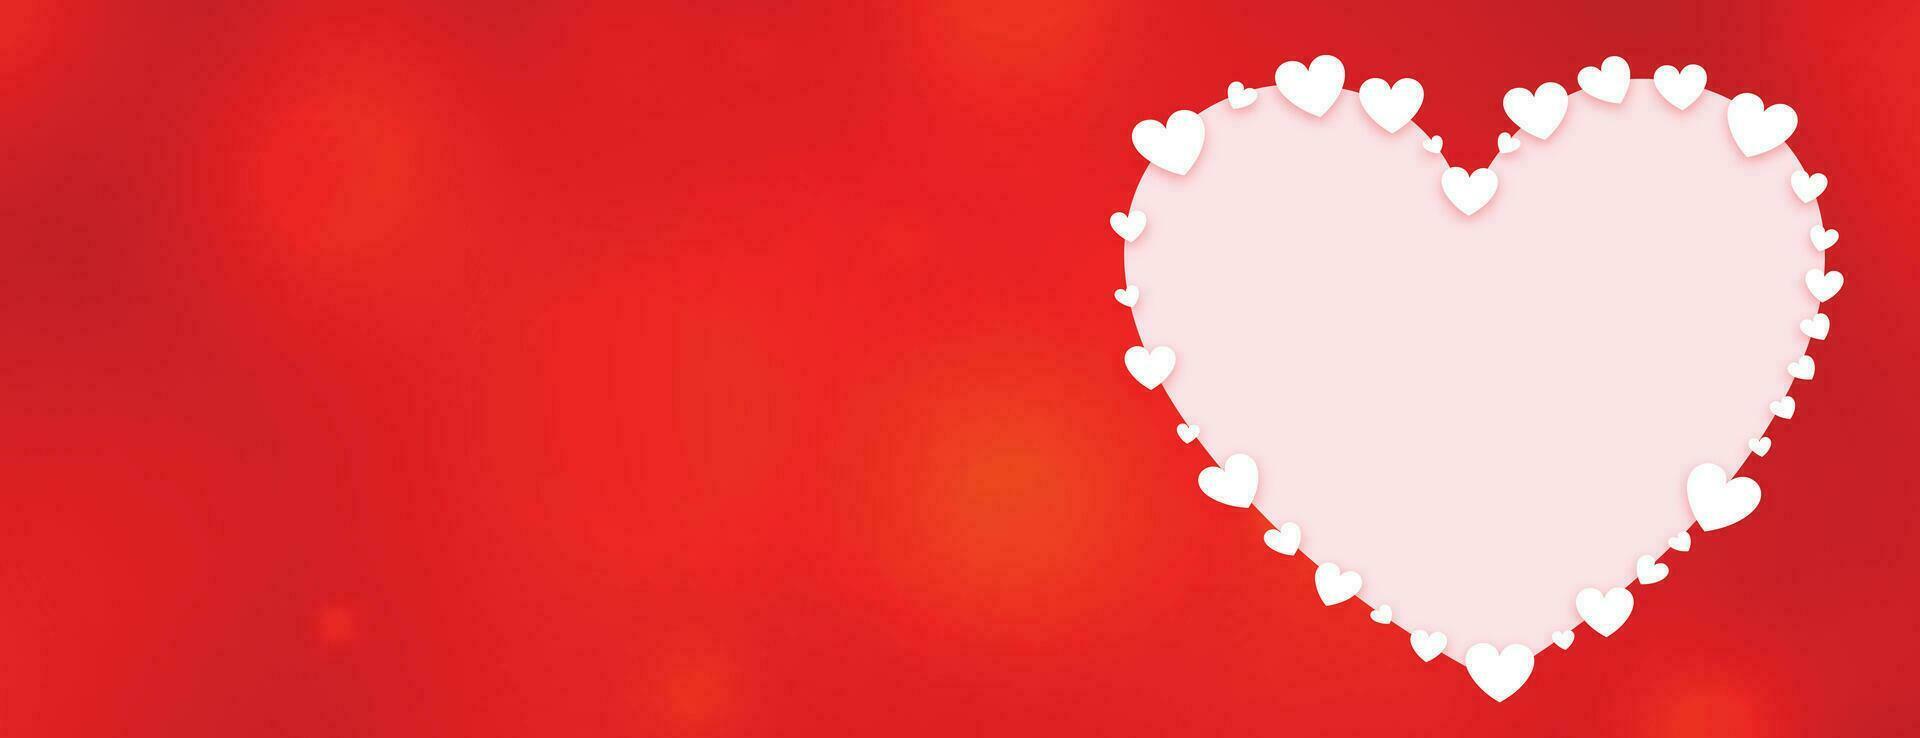 decorative heart valentines day red banner vector